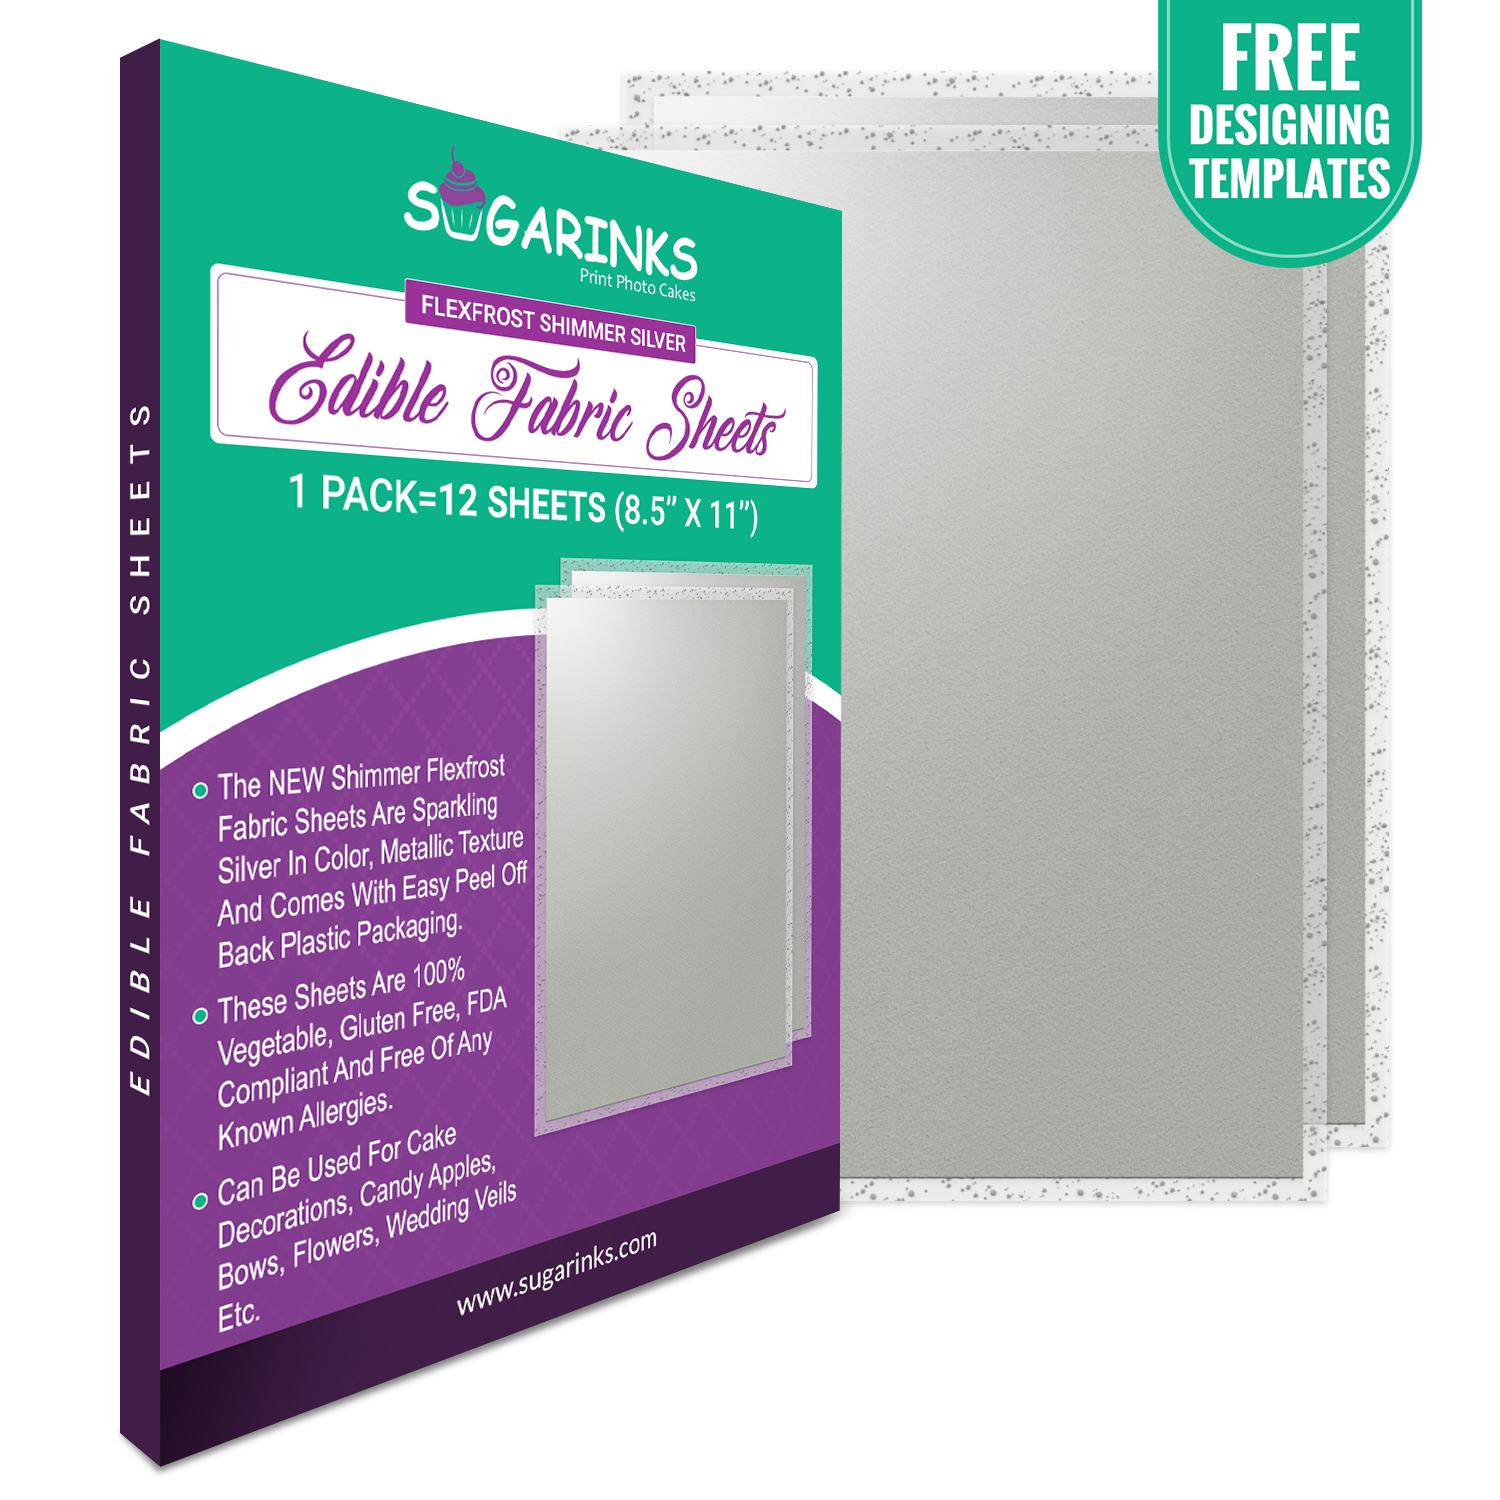 Sugarinks Premium Quality Flexfrost Shimmer Edible Fabric Sheets A4 Size (8.5”X11”) Pack of 12 – Sparkling Silver